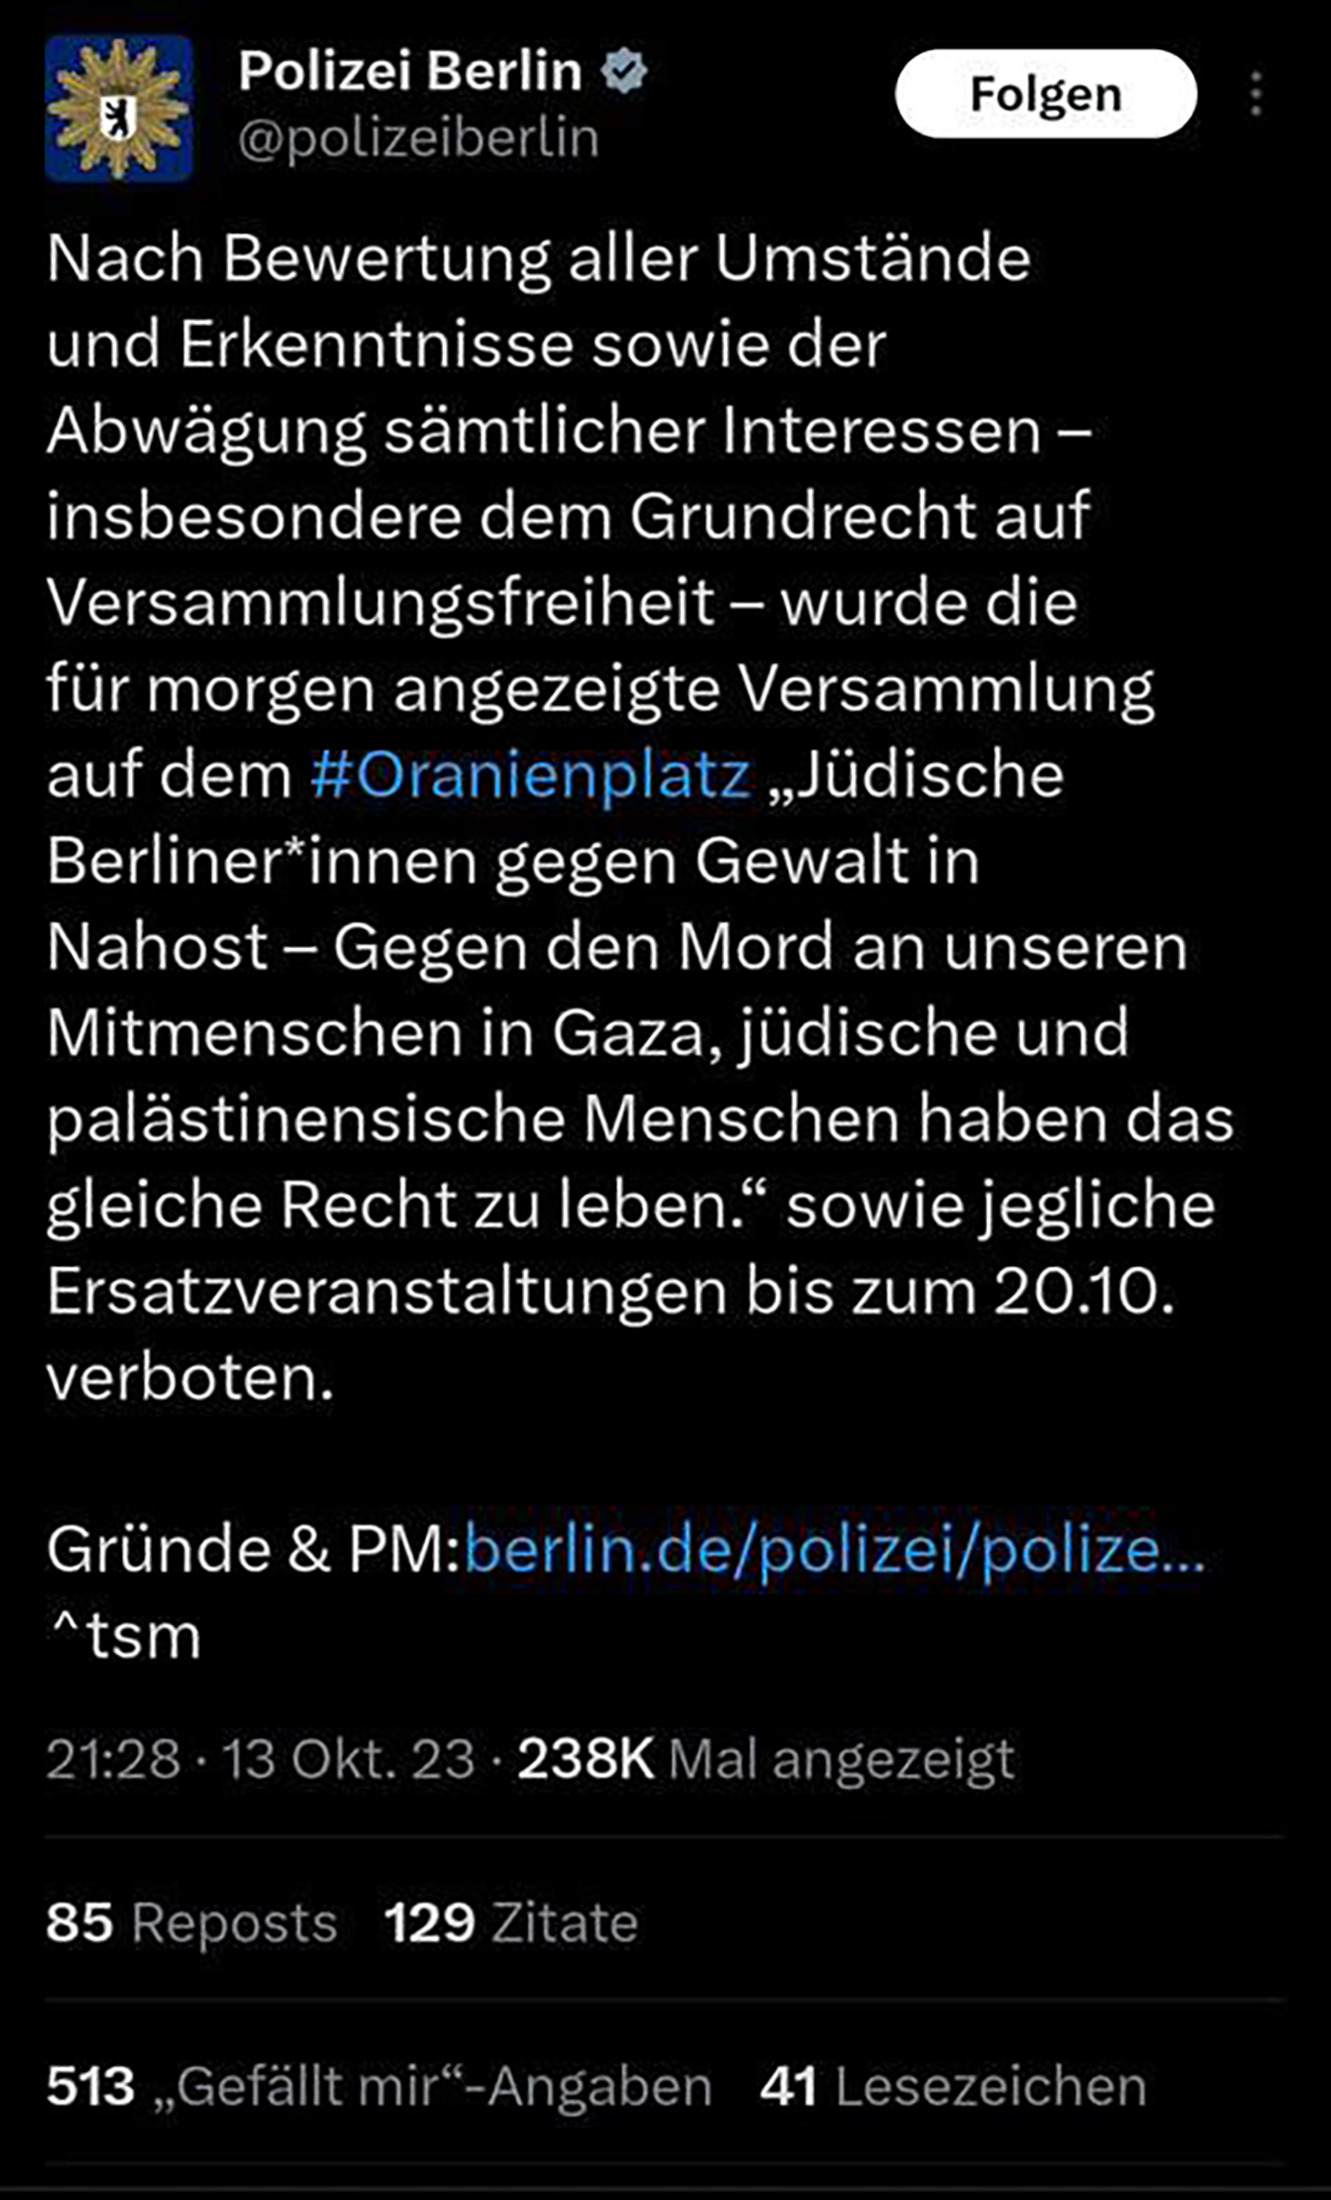 Translation: After evaluating all the circumstances and findings, as well as weighing all the interests – in particular the fundamental right to freedom of assembly – the assembly announced for tomorrow at #Oranienplatz “Jewish Berliners against violence in the Middle East – Against the murder of our fellow human beings in Gaza, Jewish and Palestinian people have the same right to live.”, as well as any substitute events are banned until October 20.